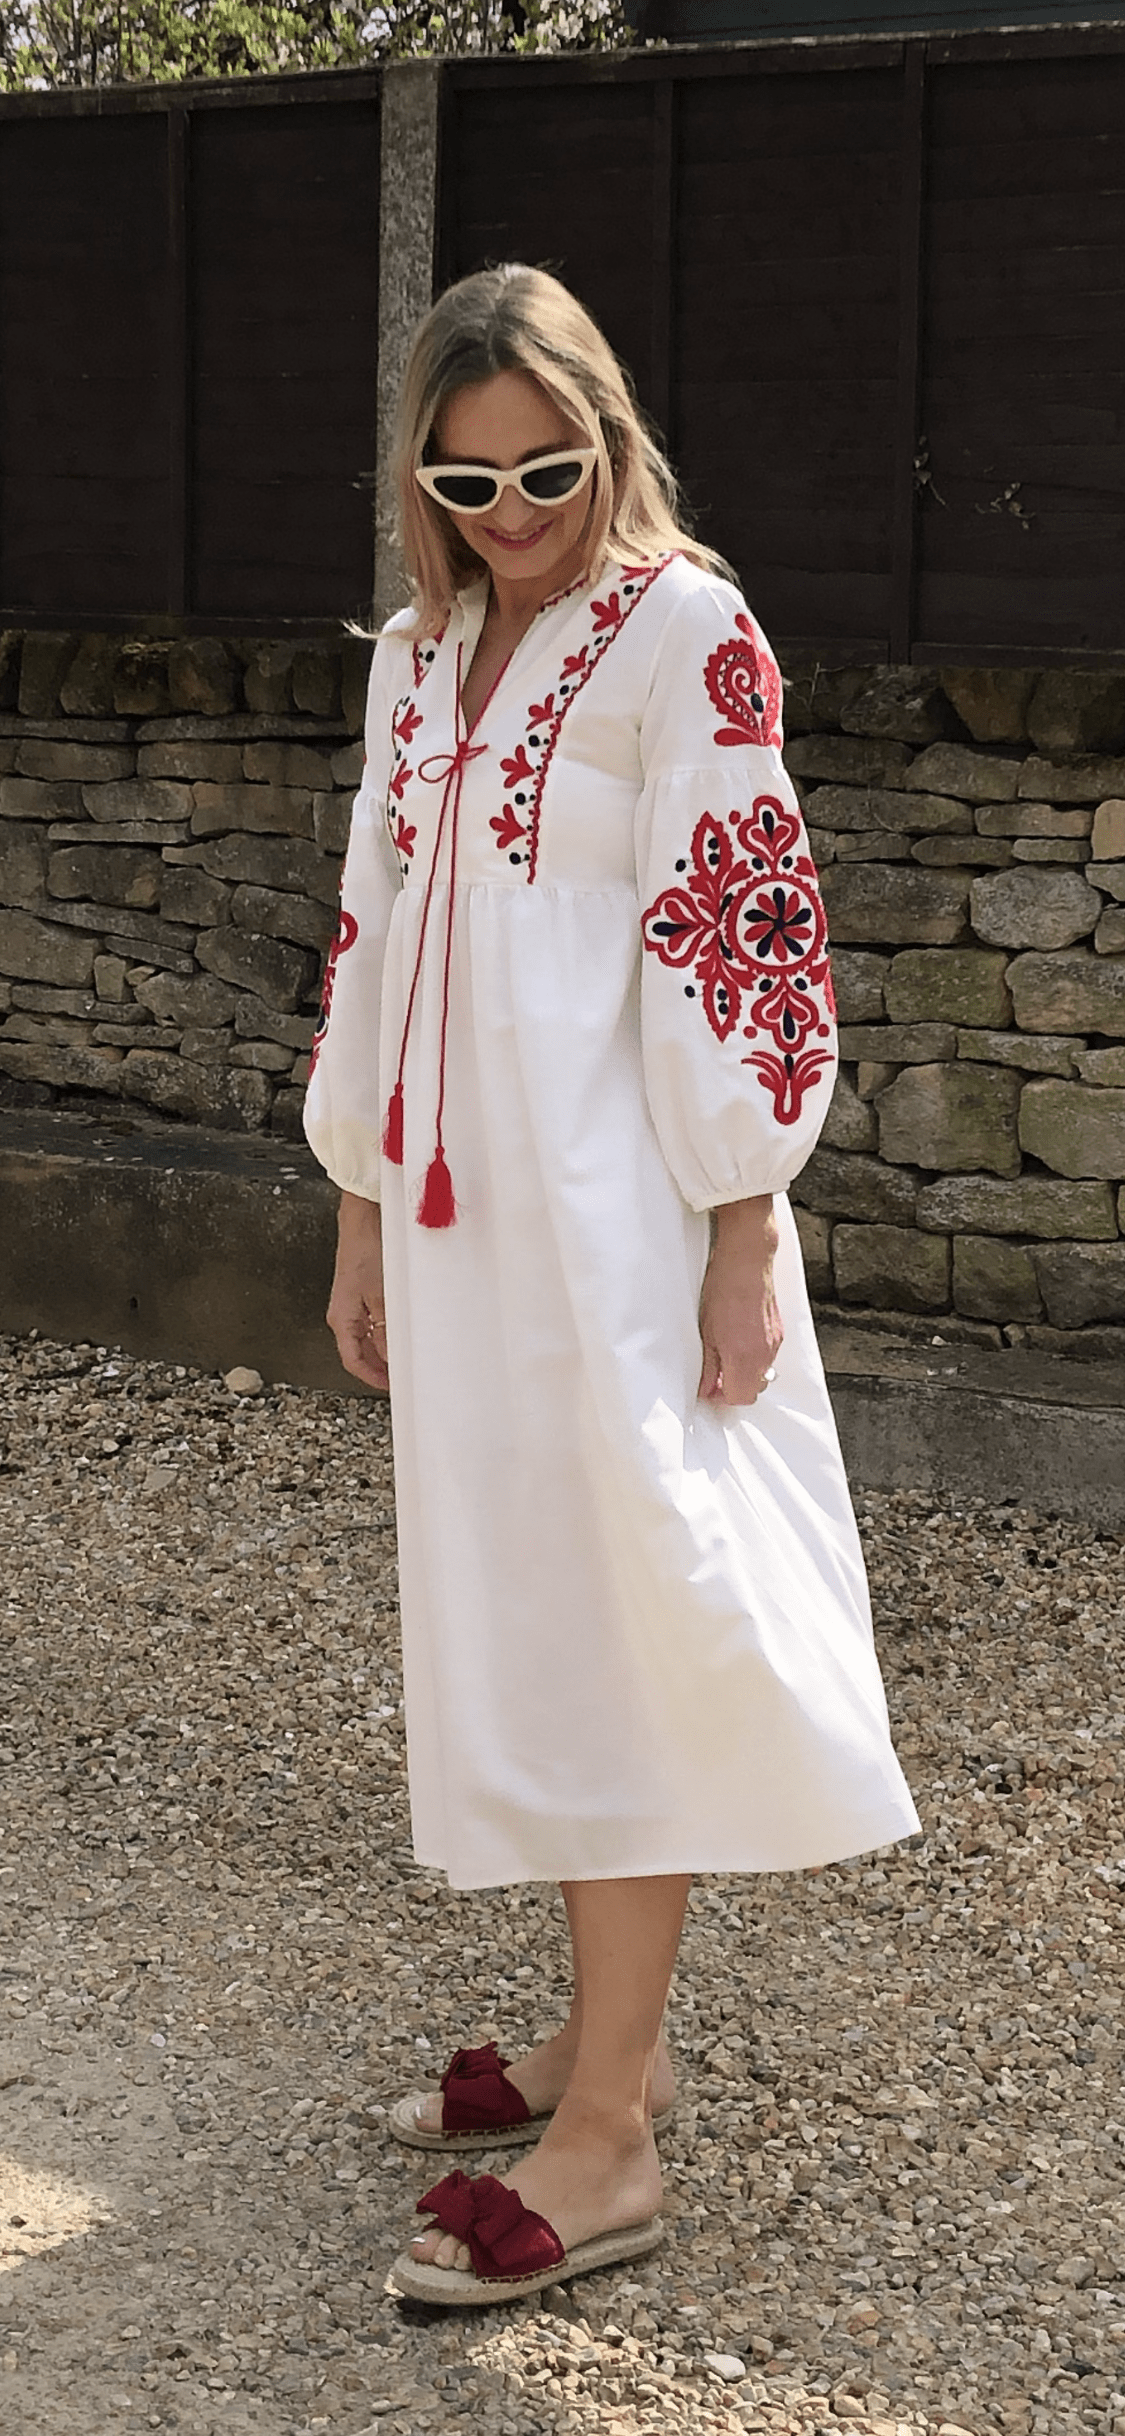 Ukranian Style Embroidered Dress - White.